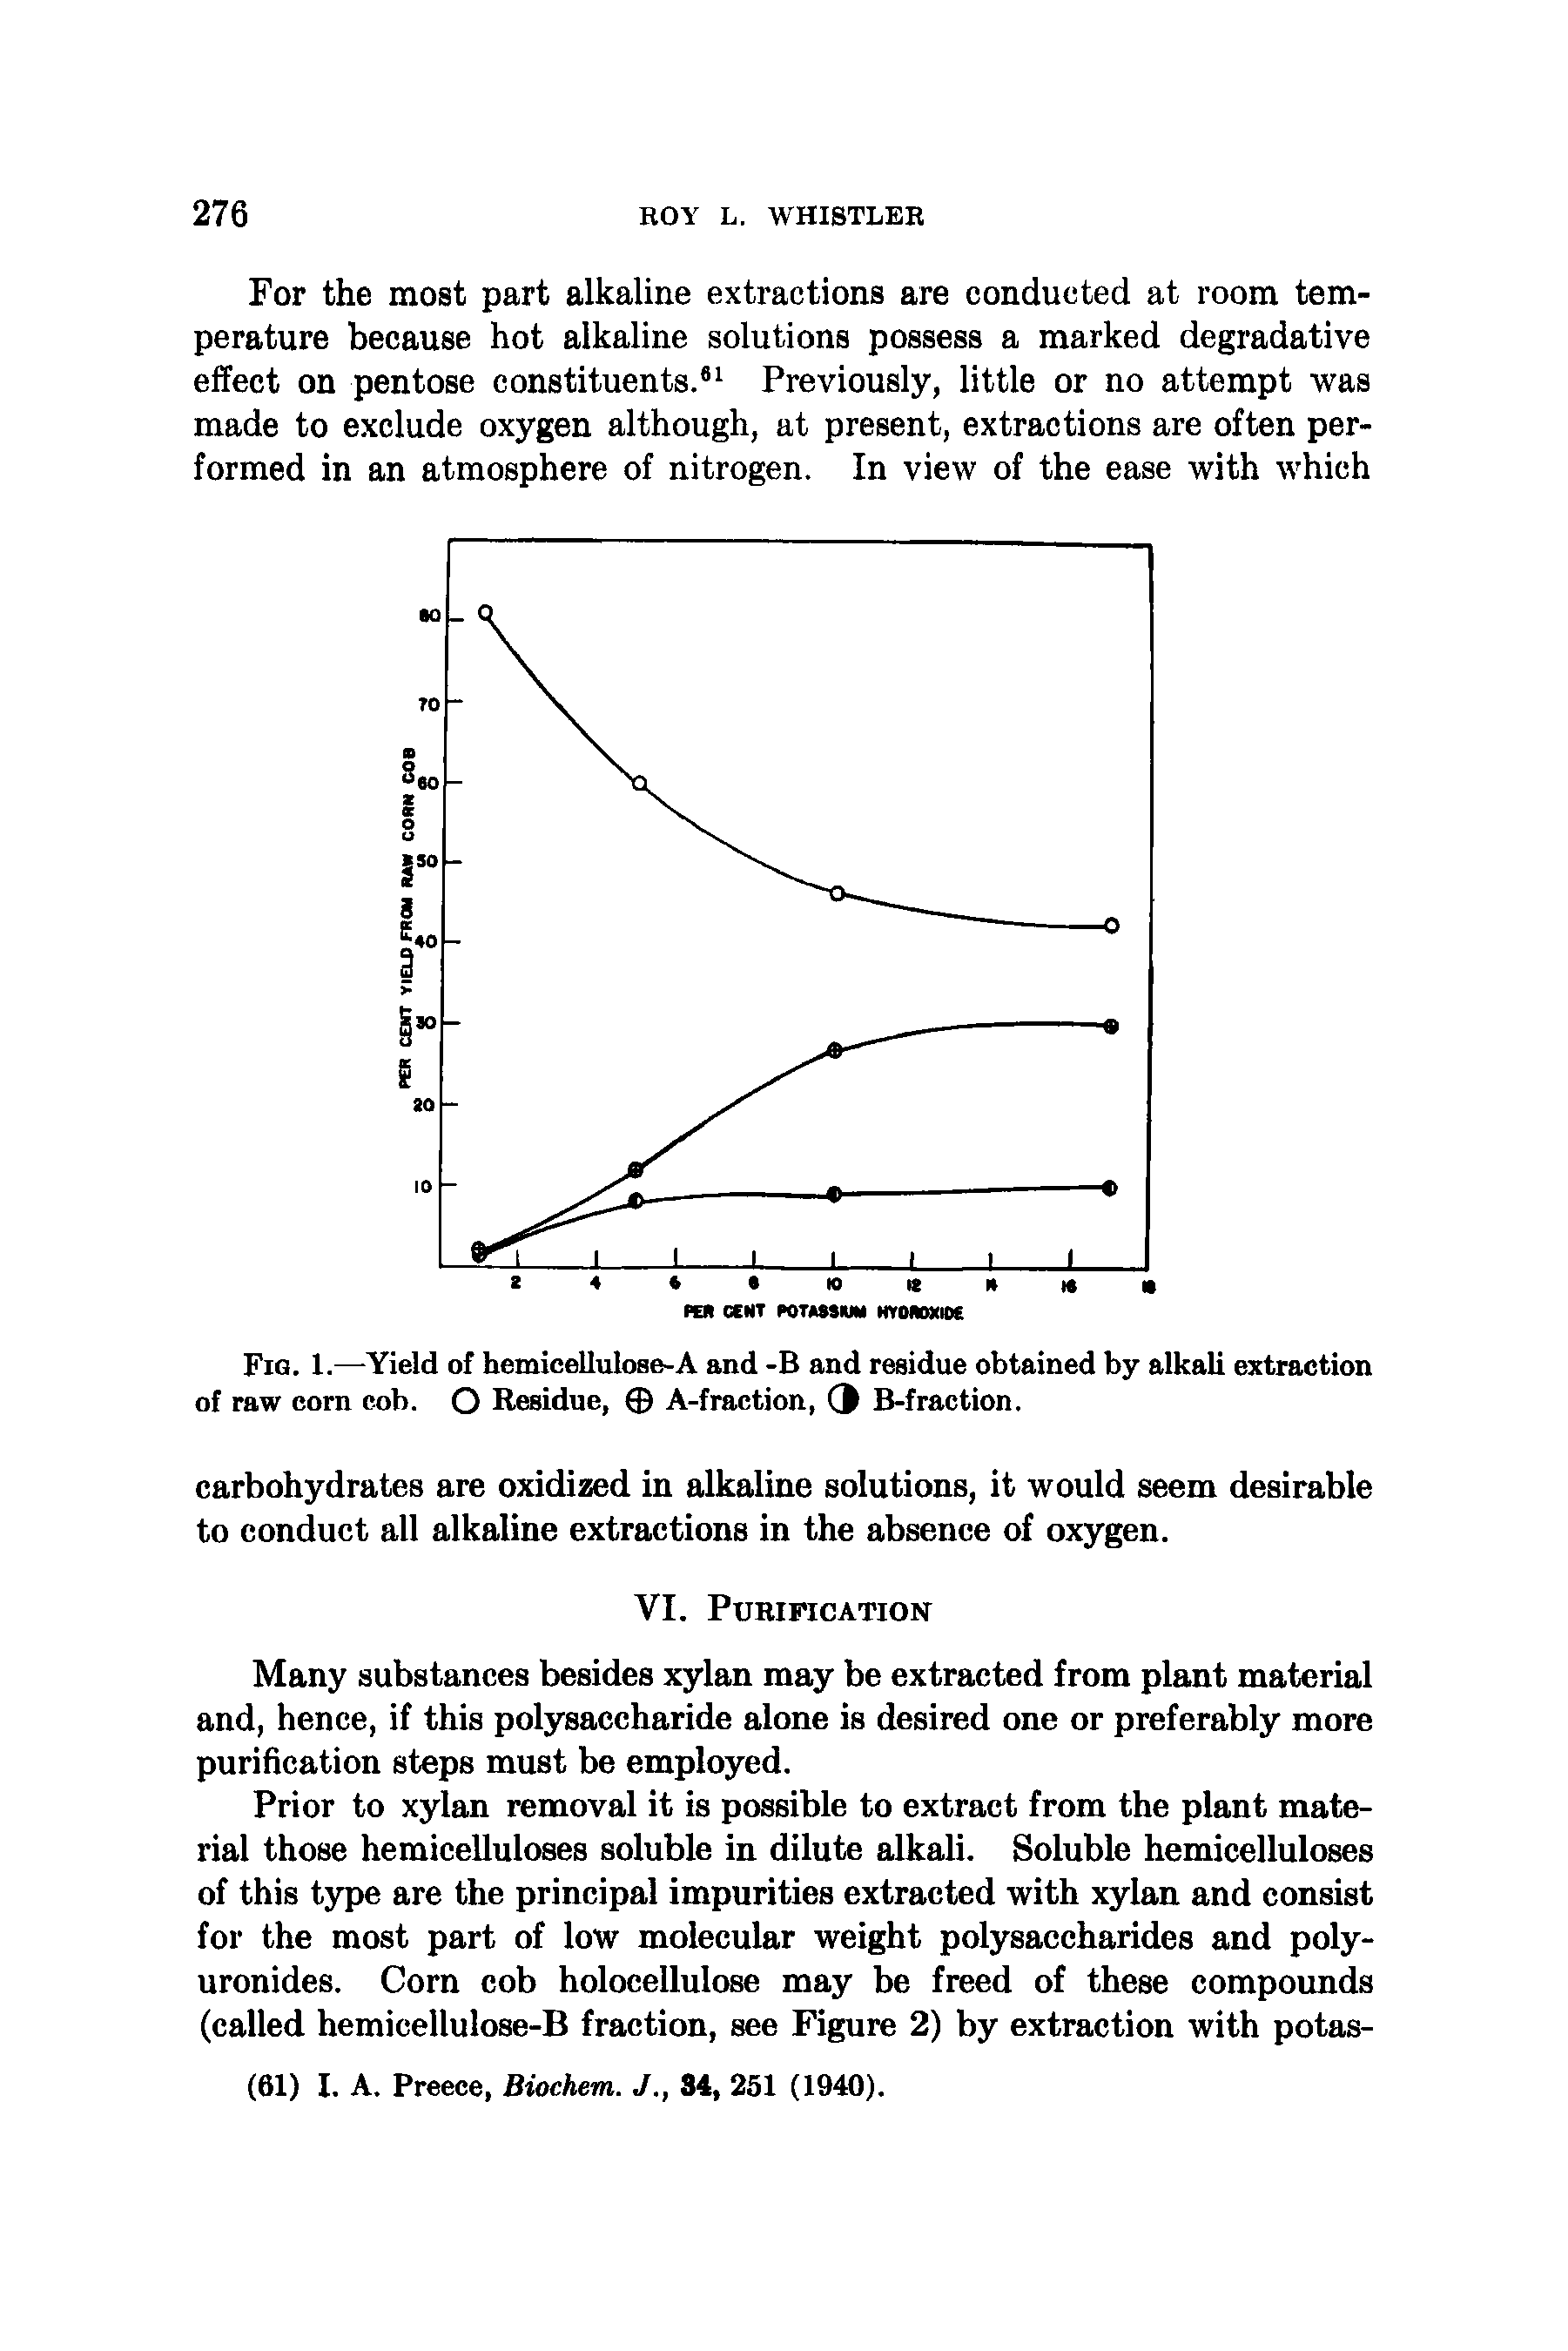 Fig. 1.—Yield of hemicellulose-A and -B and residue obtained by alkali extraction of raw corn cob. O Residue, A-fraction, 3 B-fraction.